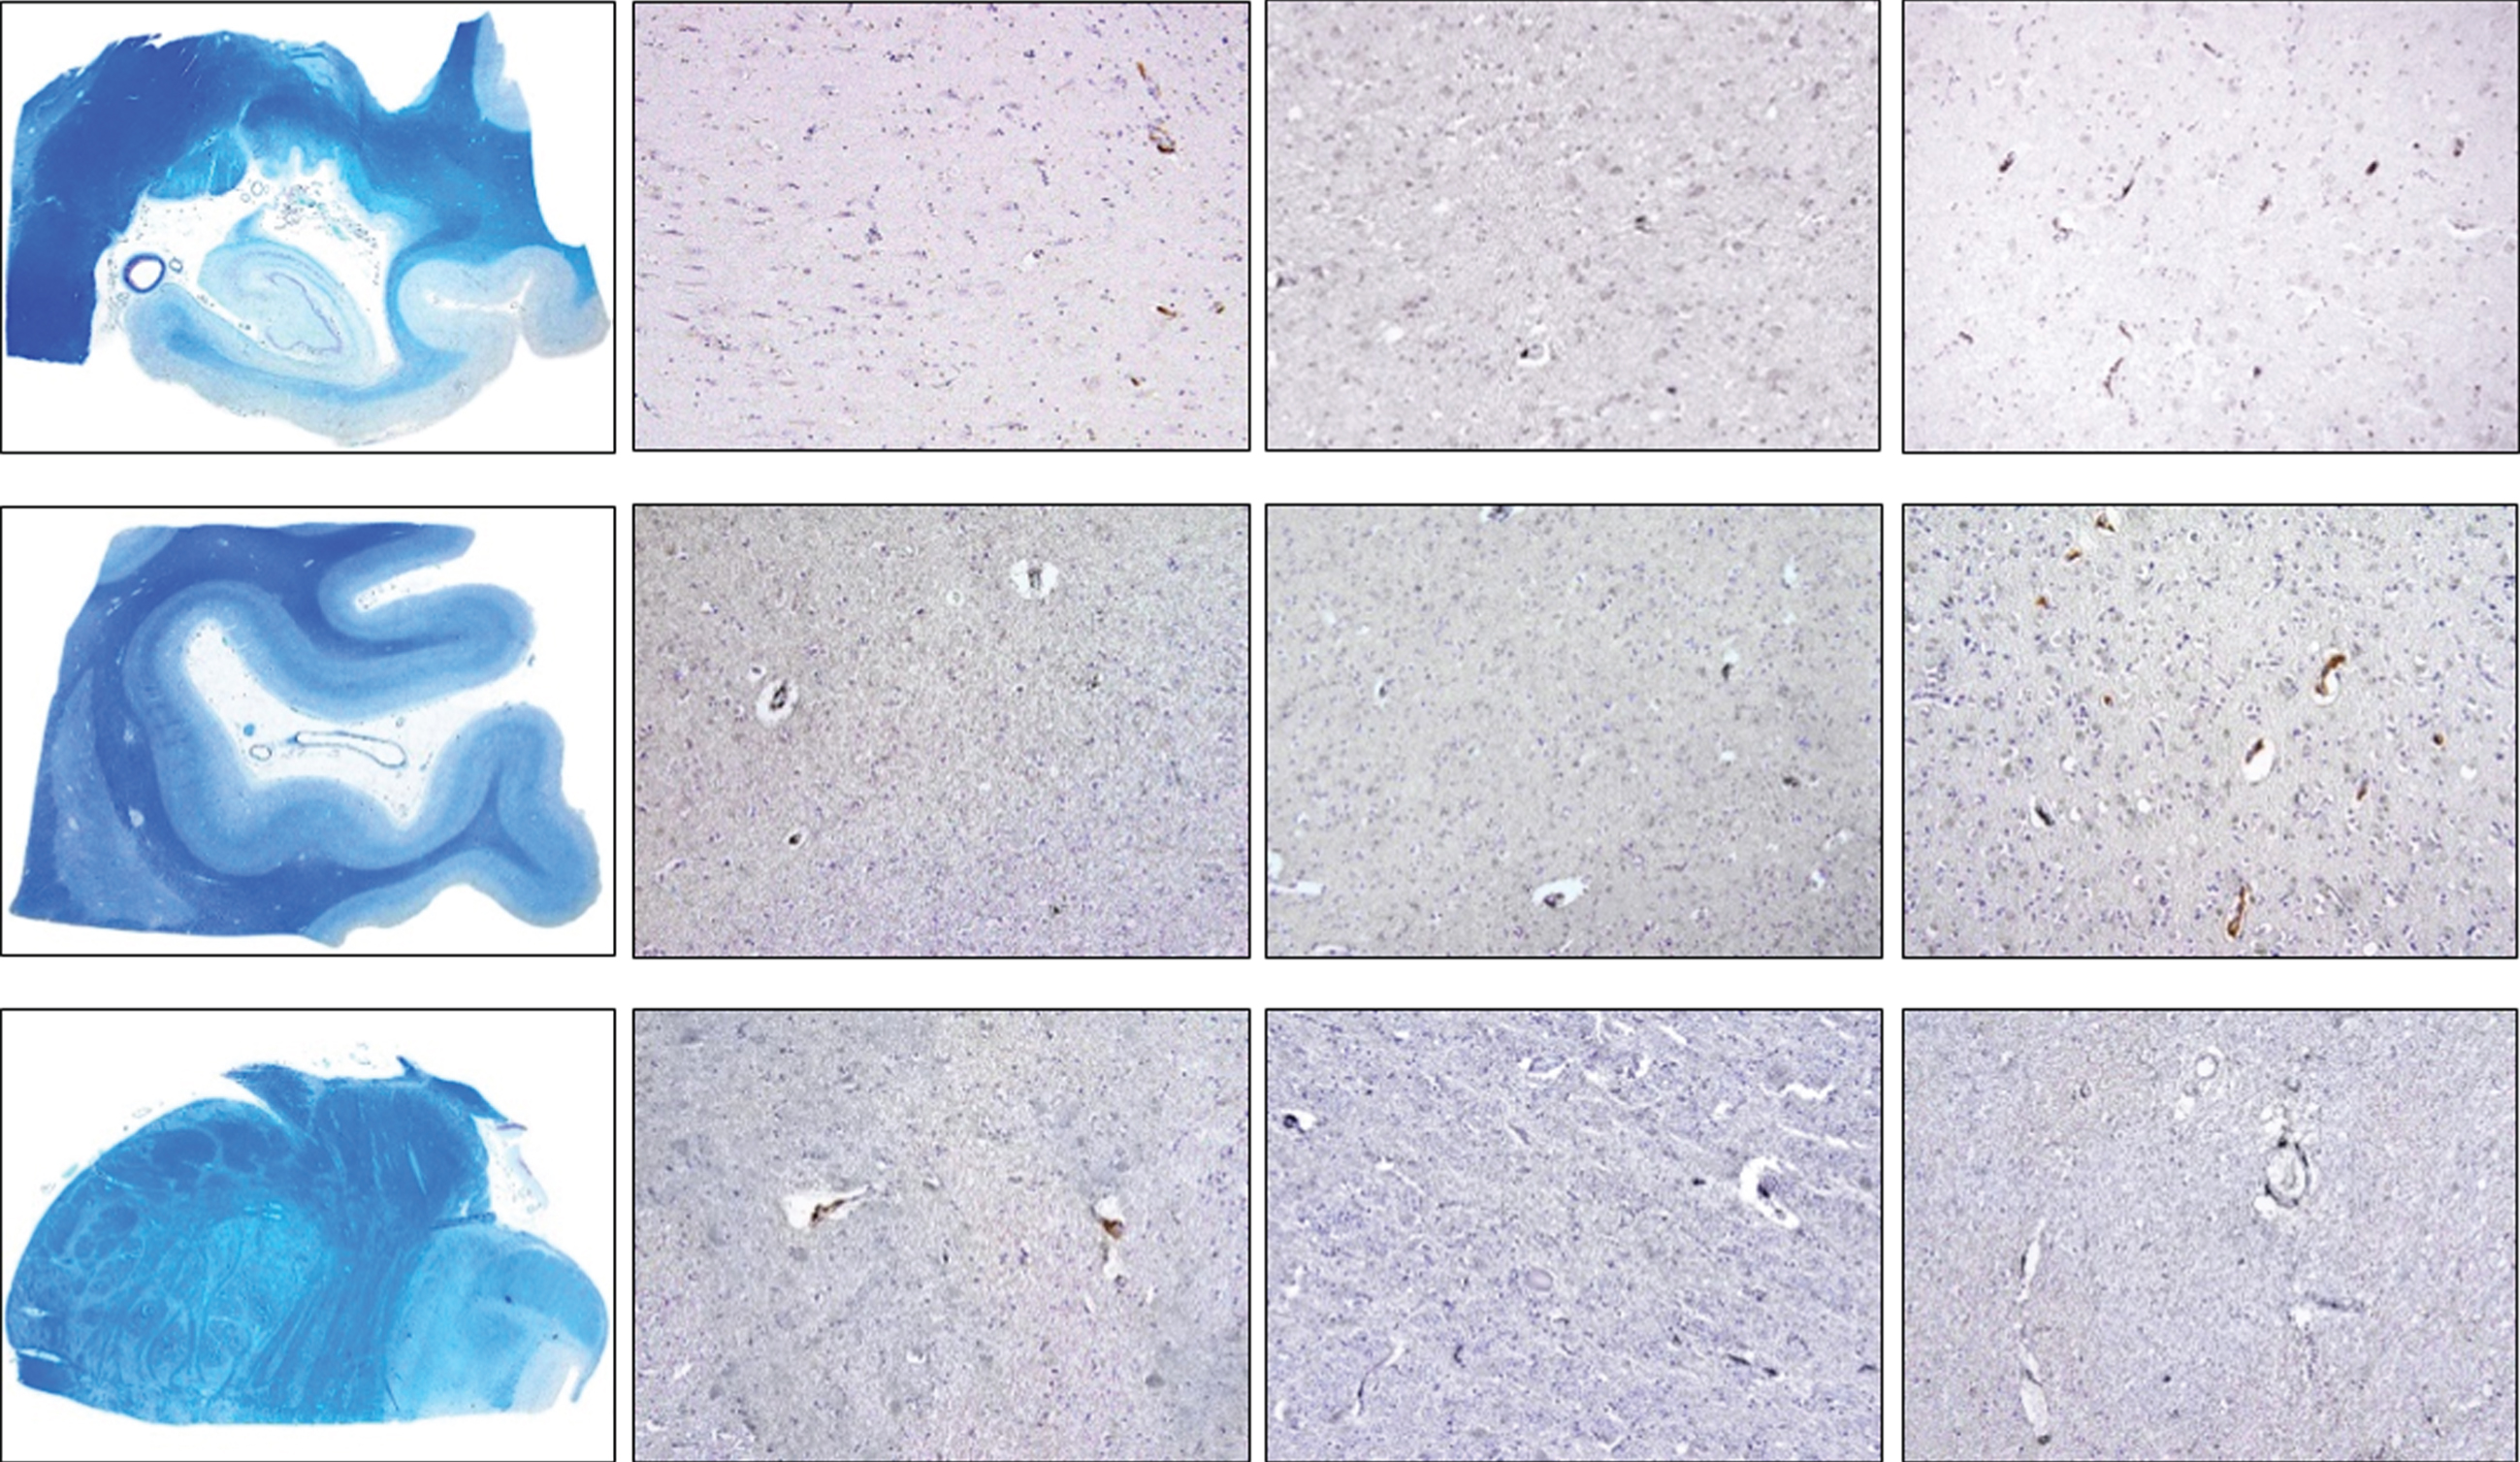 Density of CD206-positive cells in control, intermediate and late AD, respectively (upper row, hippocampus; middle row, occipital cortex, lower row, brainstem) (magnification 100x).